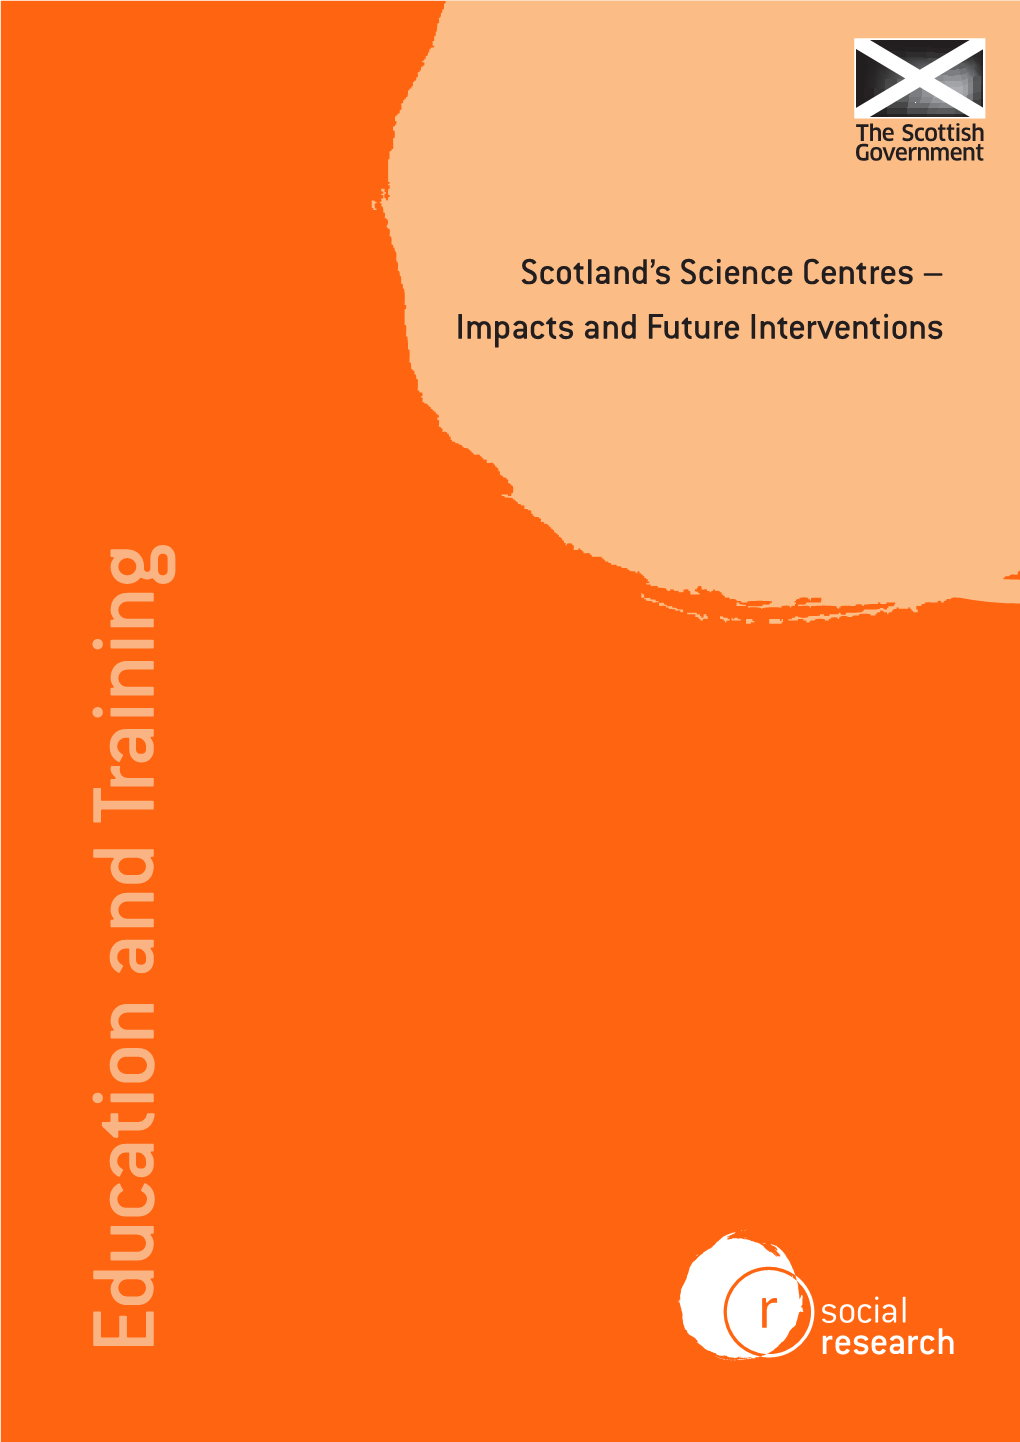 Scotland's Science Centres - Impacts and Future Interventions